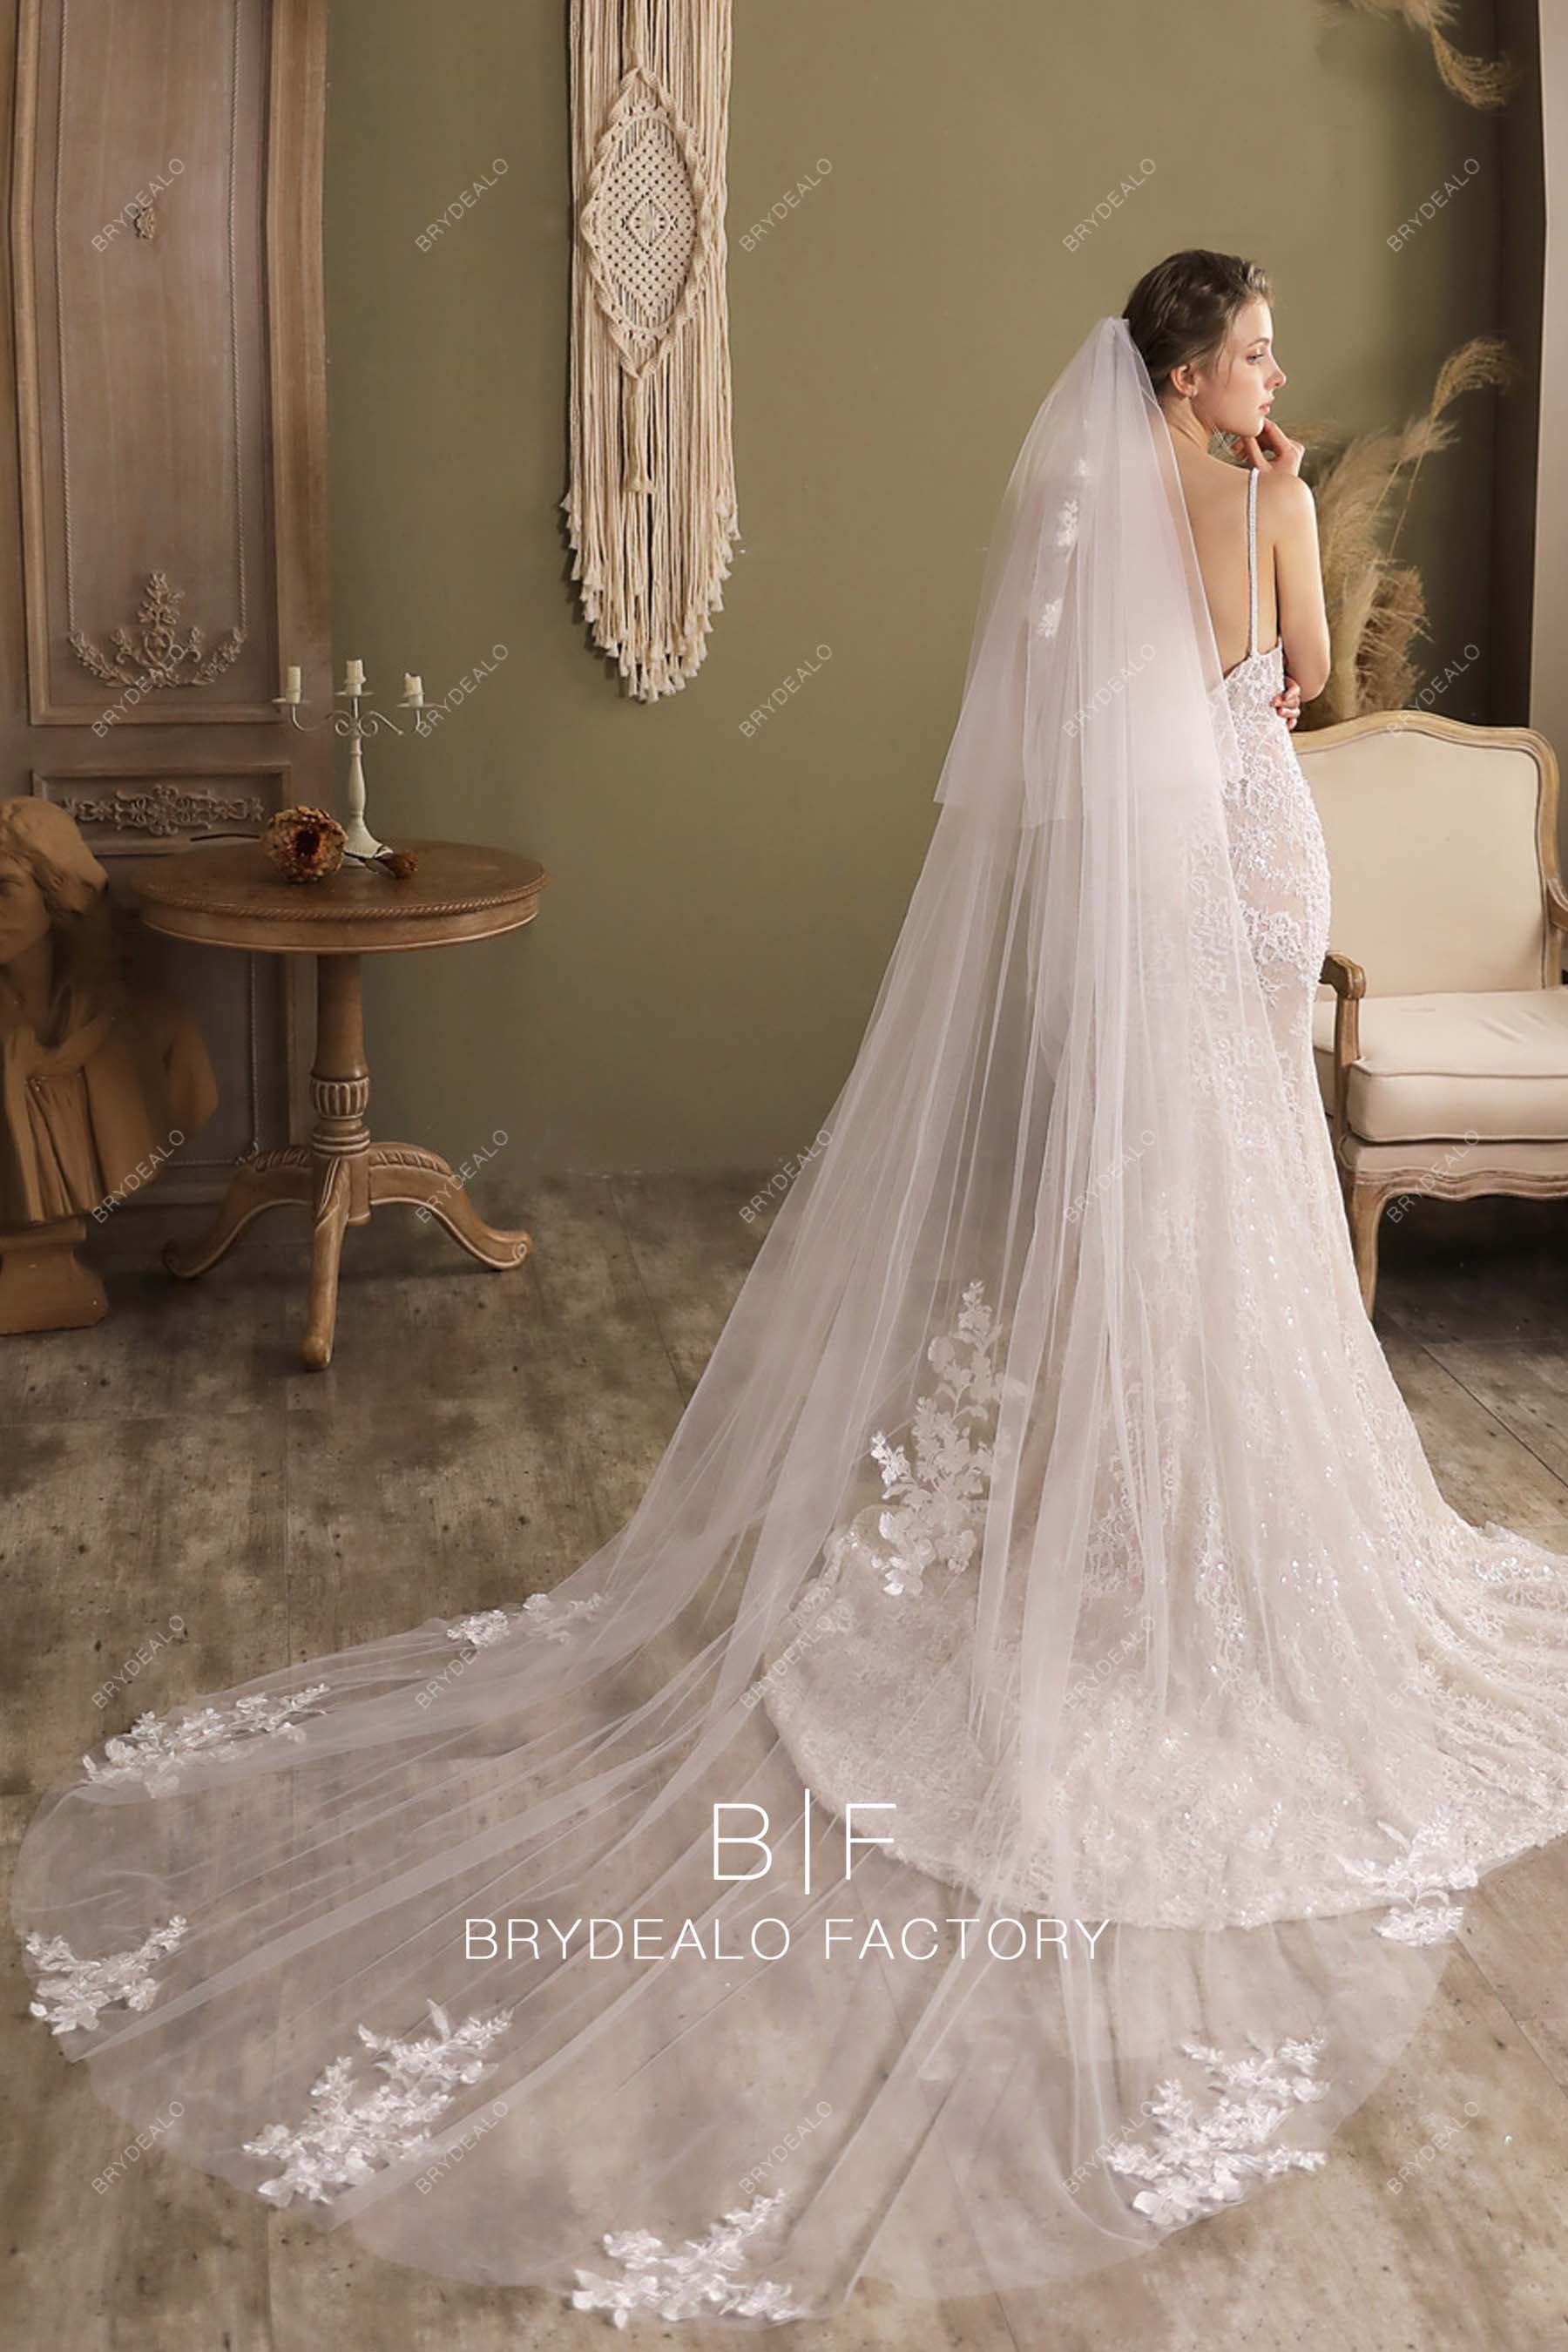 Viniodress Lacy Petal Tulle Bridal Veil Cathedral Length